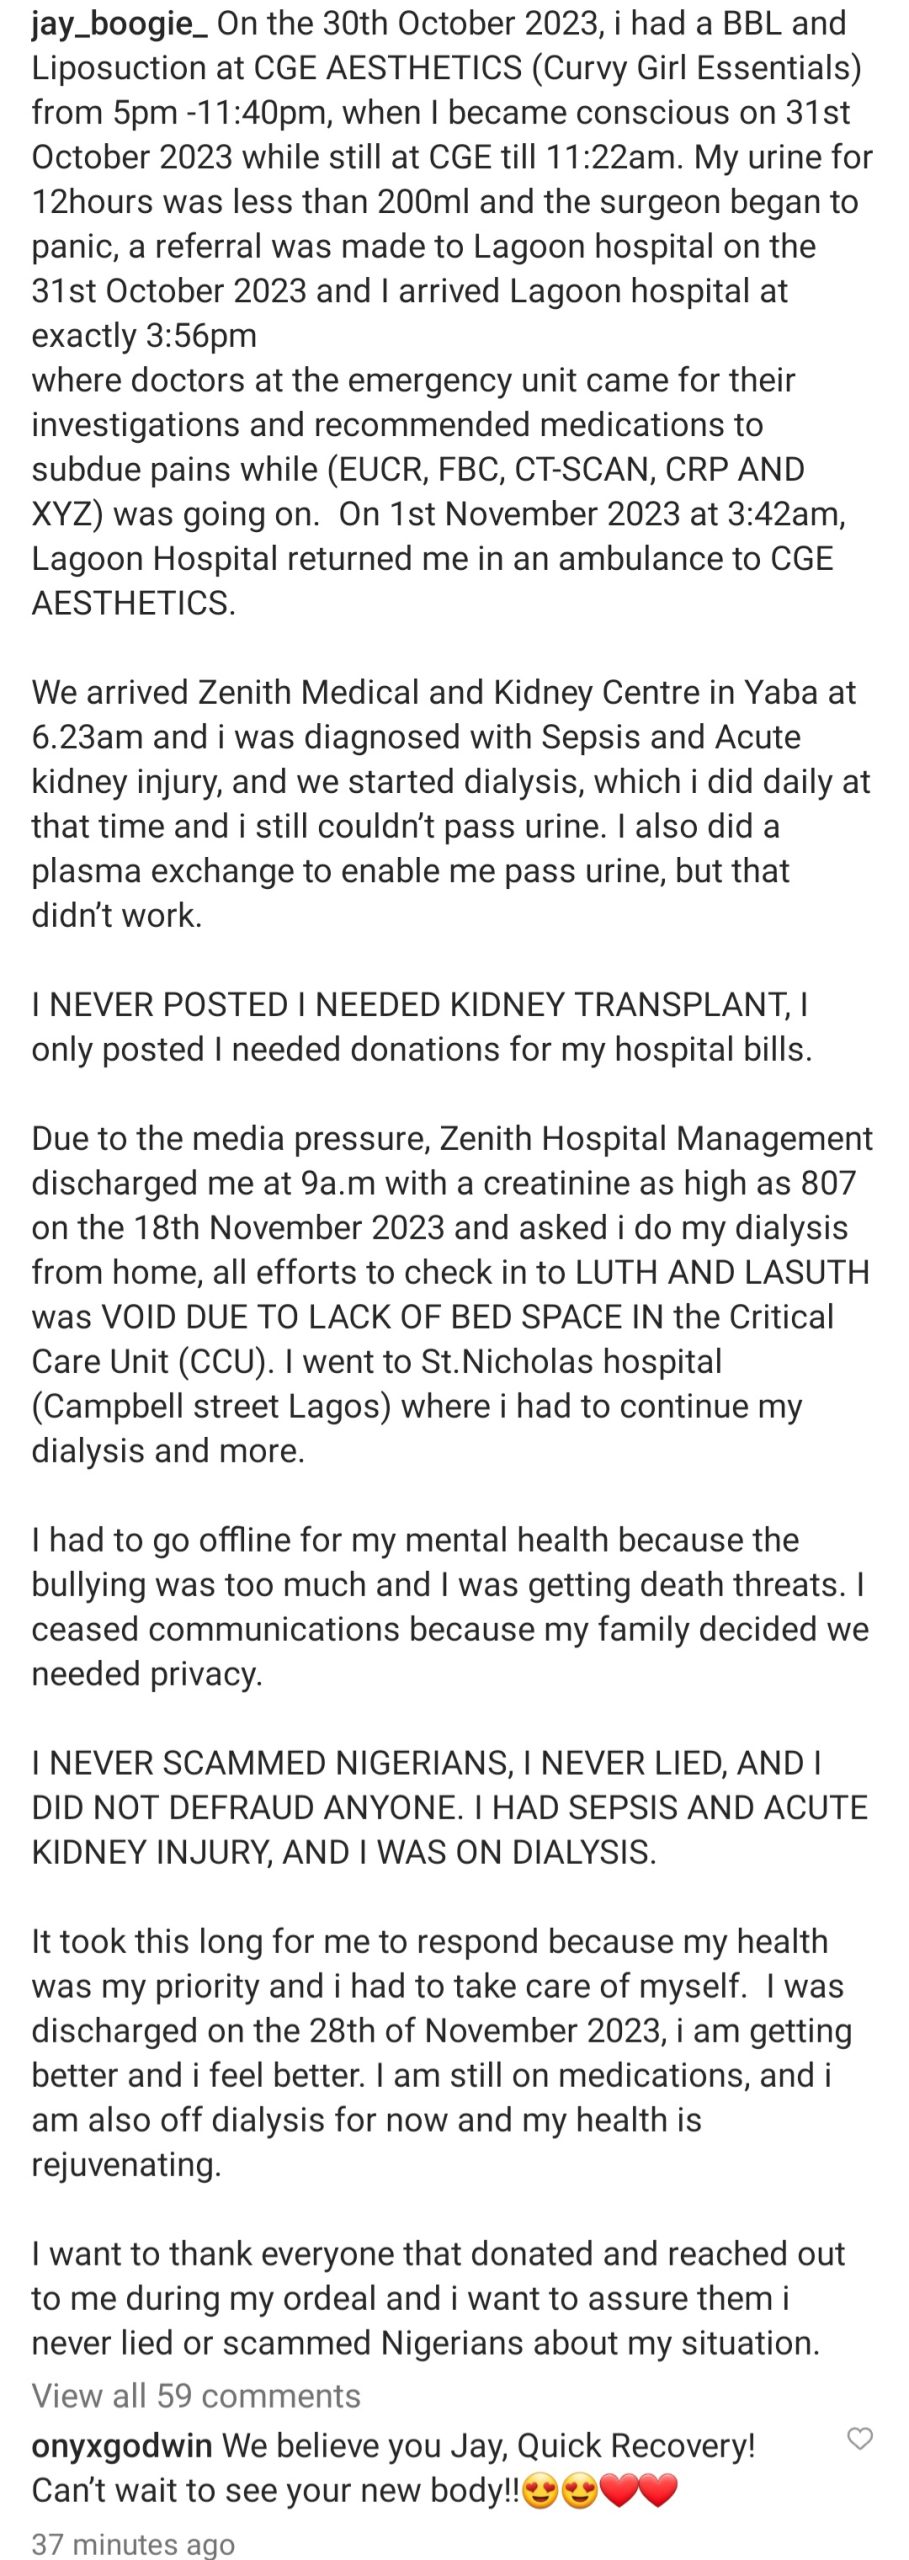 "I never said I needed kidney transplant" Jay Boogie says after he was accused of seeking donations from Nigerians with fake medical diagnosis